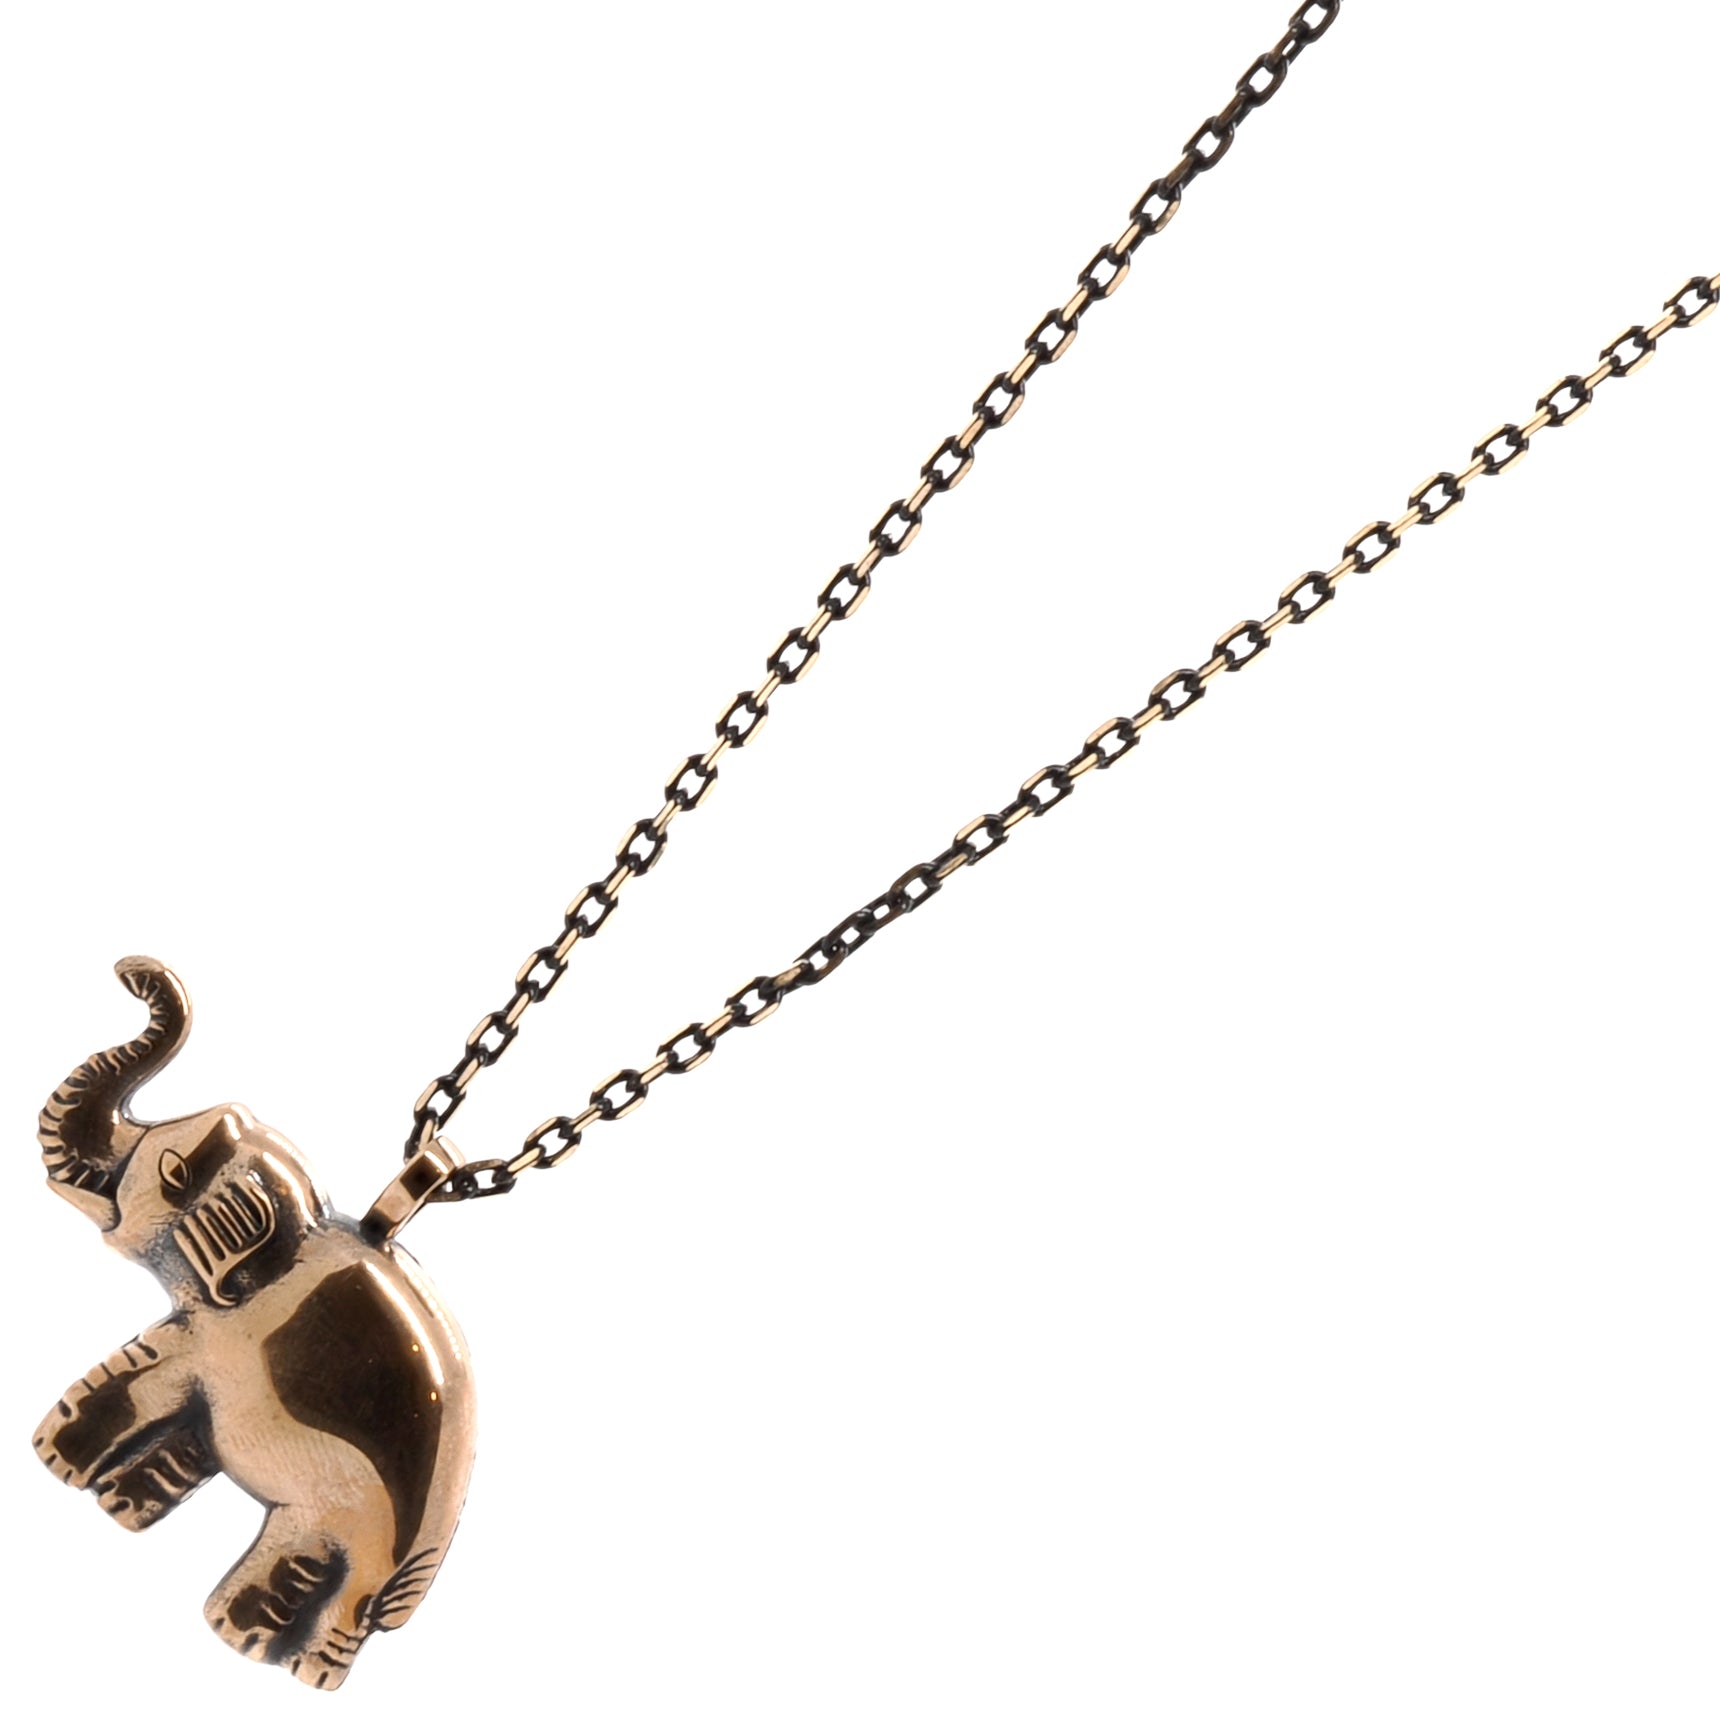 Beautiful Bronze Pendant - The Handcrafted Elephant Necklace Embodies the Spirit of Good Luck.